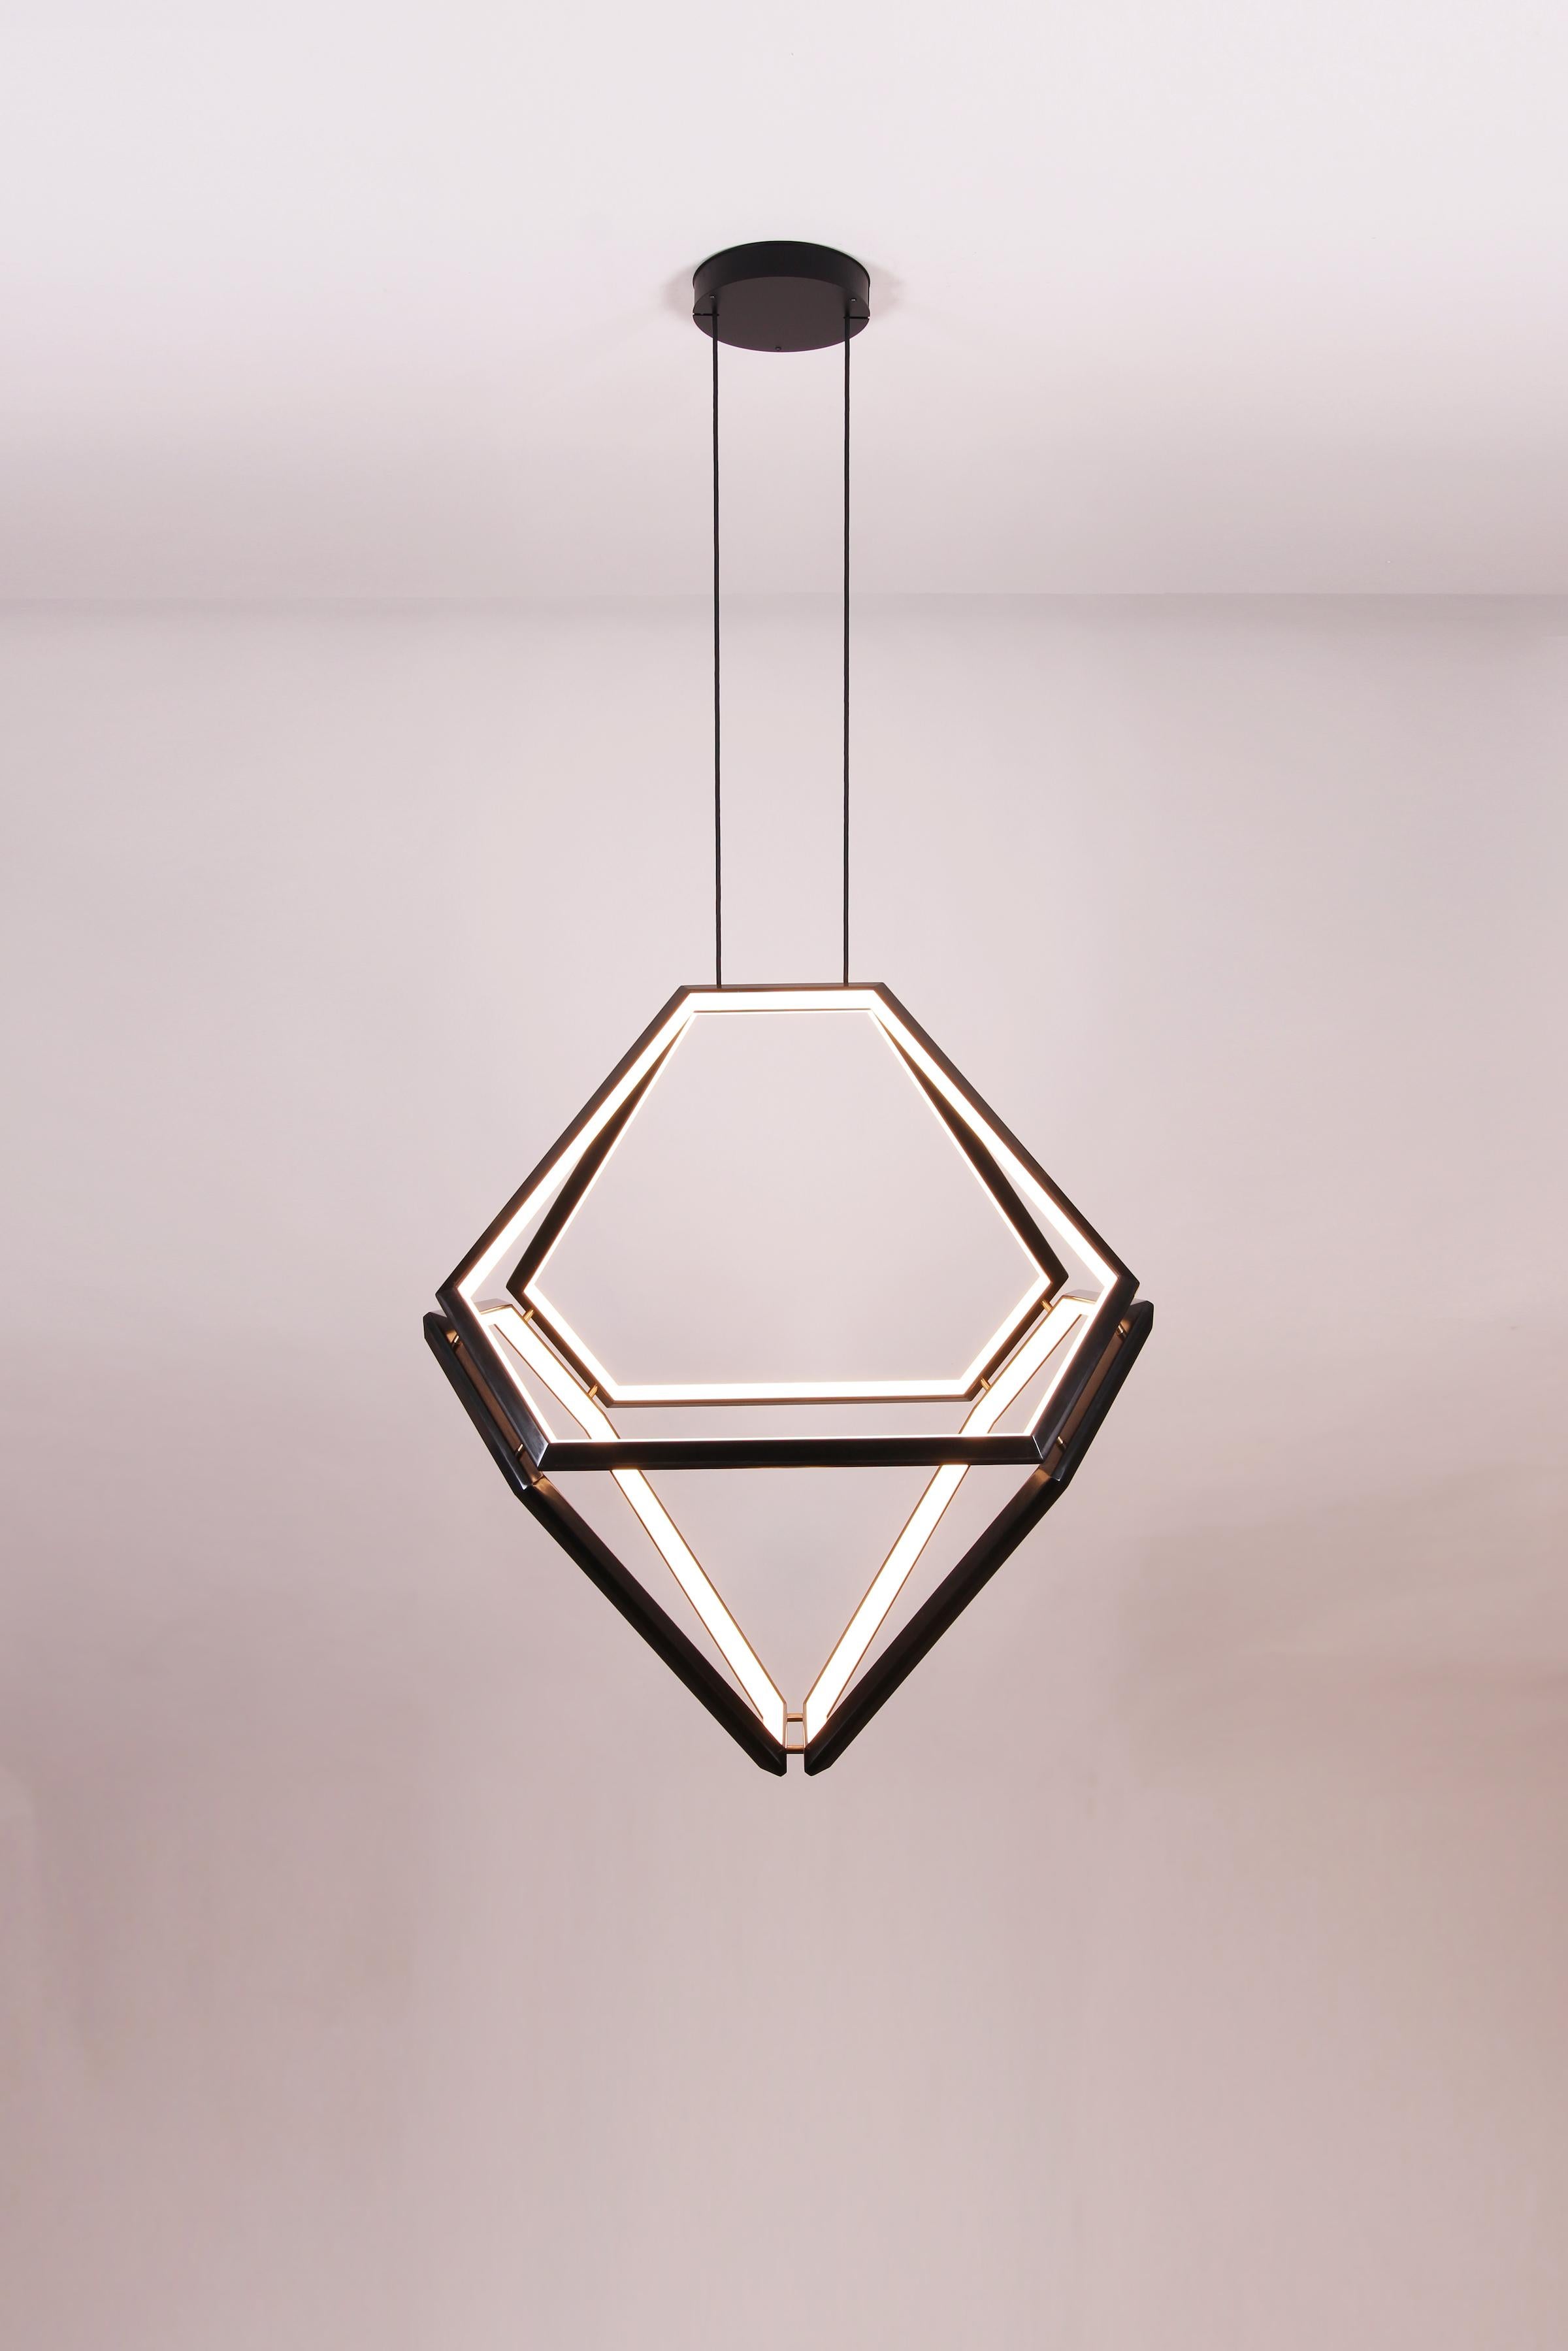 Octo - a One-of-a-kind chandelier created by Studio Endo as a prototype. Limited Edition 1 of 1

Four light fixtures are joined together and wired together to create an octohedron of light. This unique chandelier defines a large space, with a